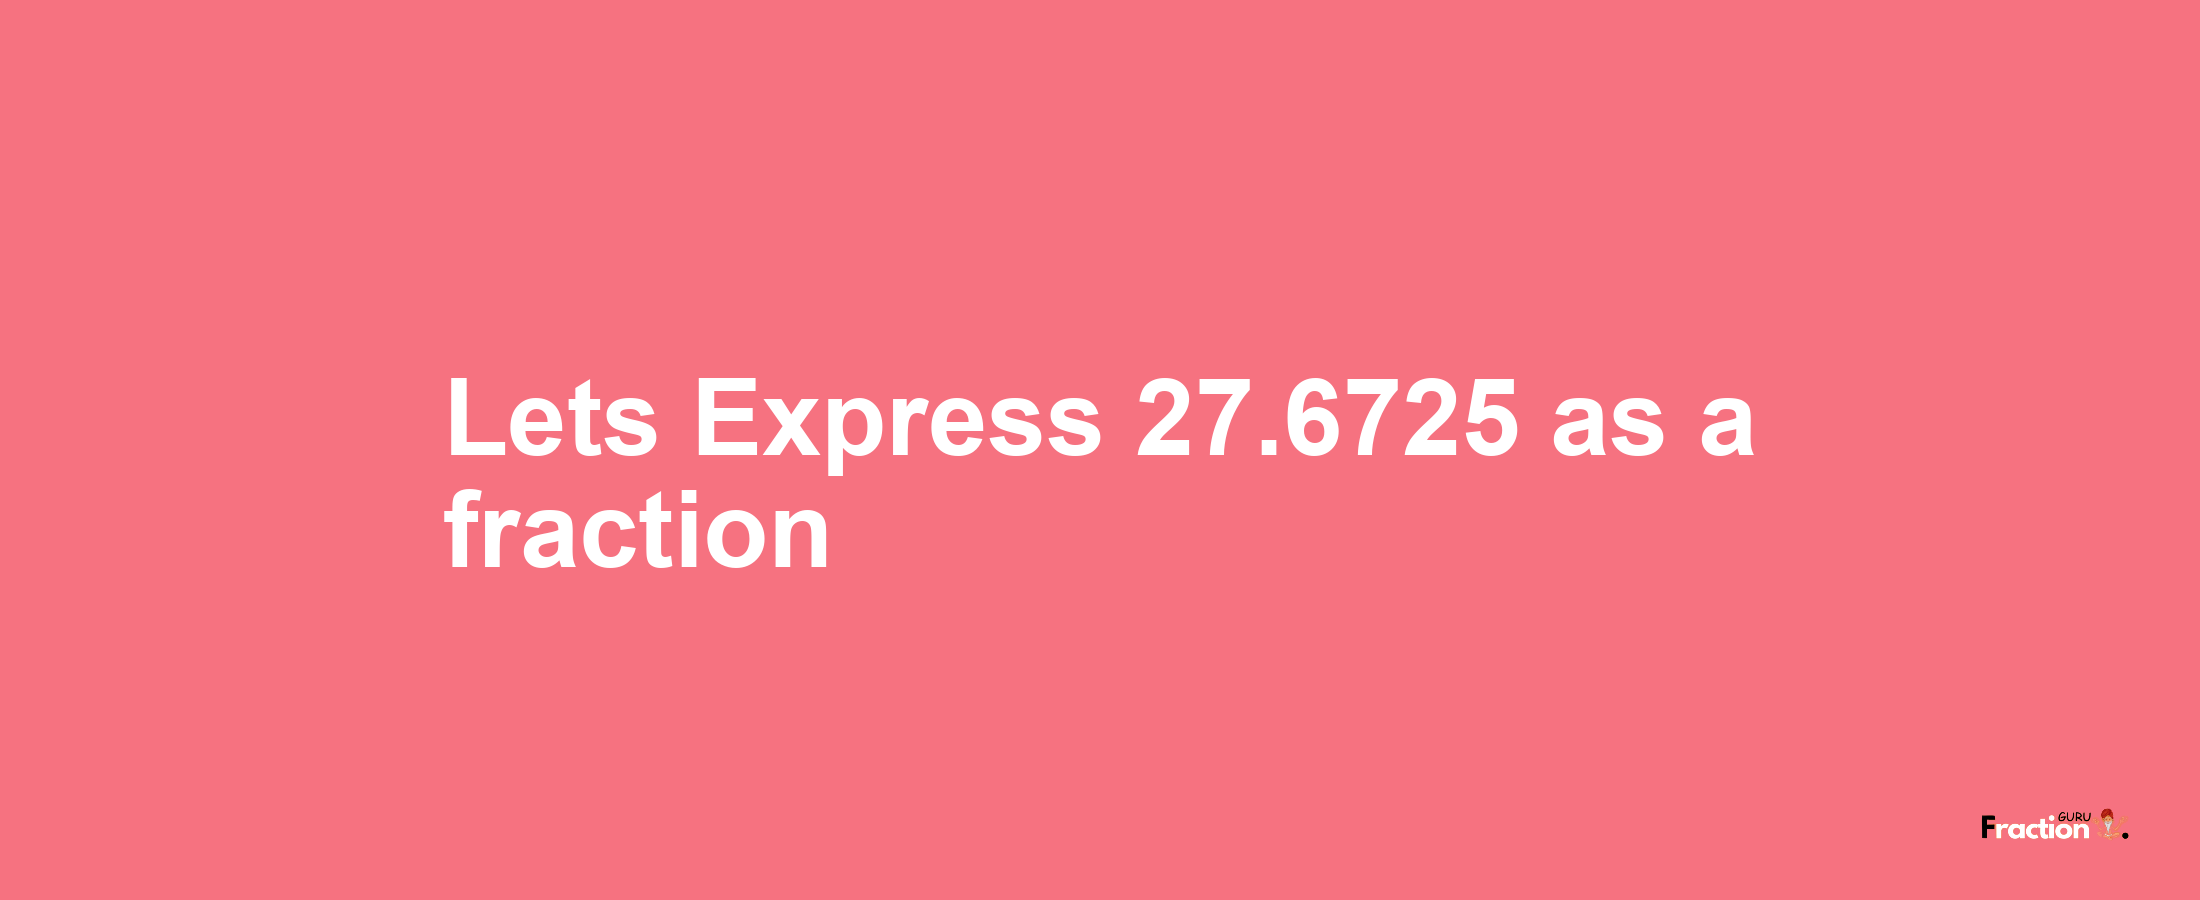 Lets Express 27.6725 as afraction